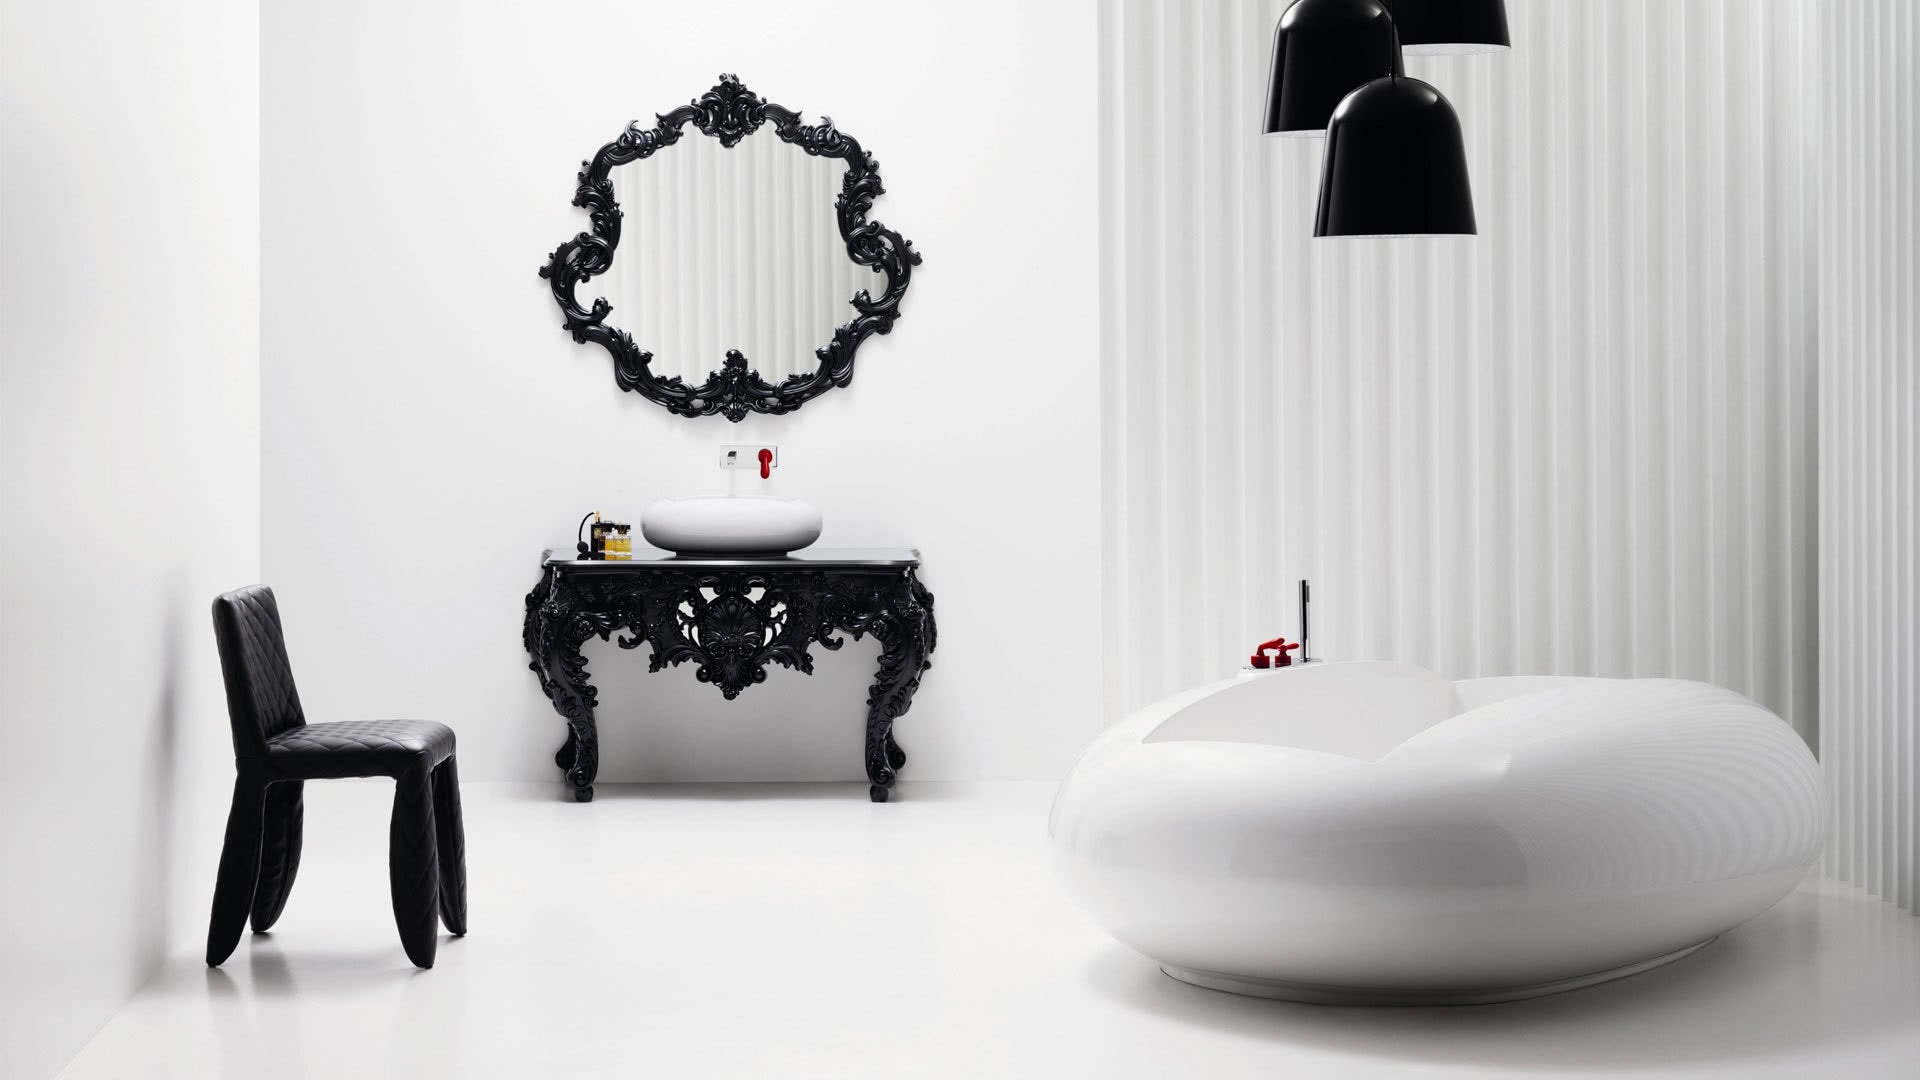 Bathroom Inspirations That Will Take Your Breath Way